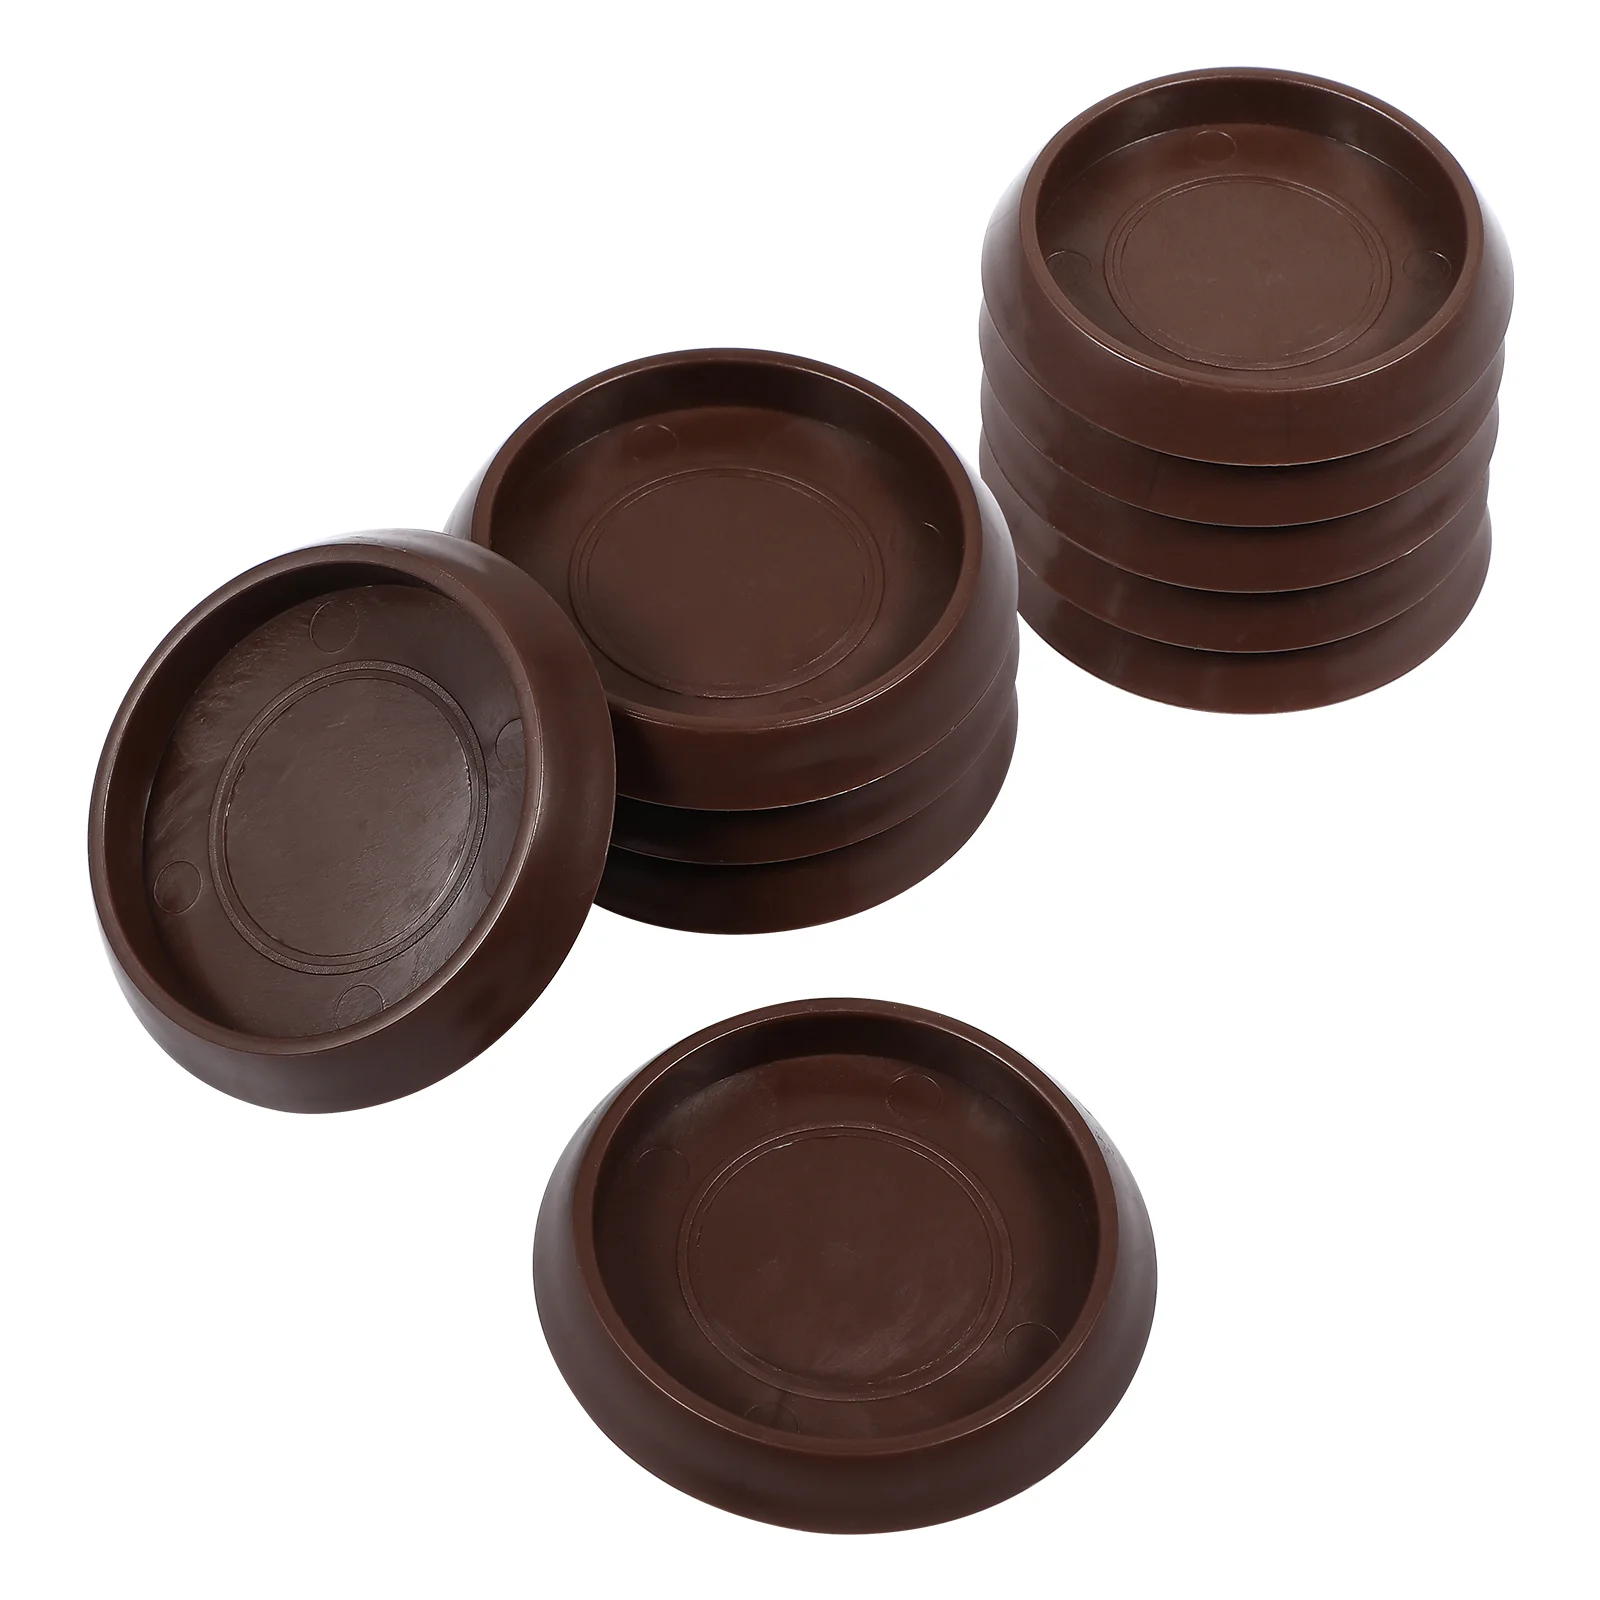 

10 Pcs Caster Cup Furniture Floor Cups Chair Stoppers Nonslip Medallion Rug Anti- Wheel Grippers Brown Rug Sofas